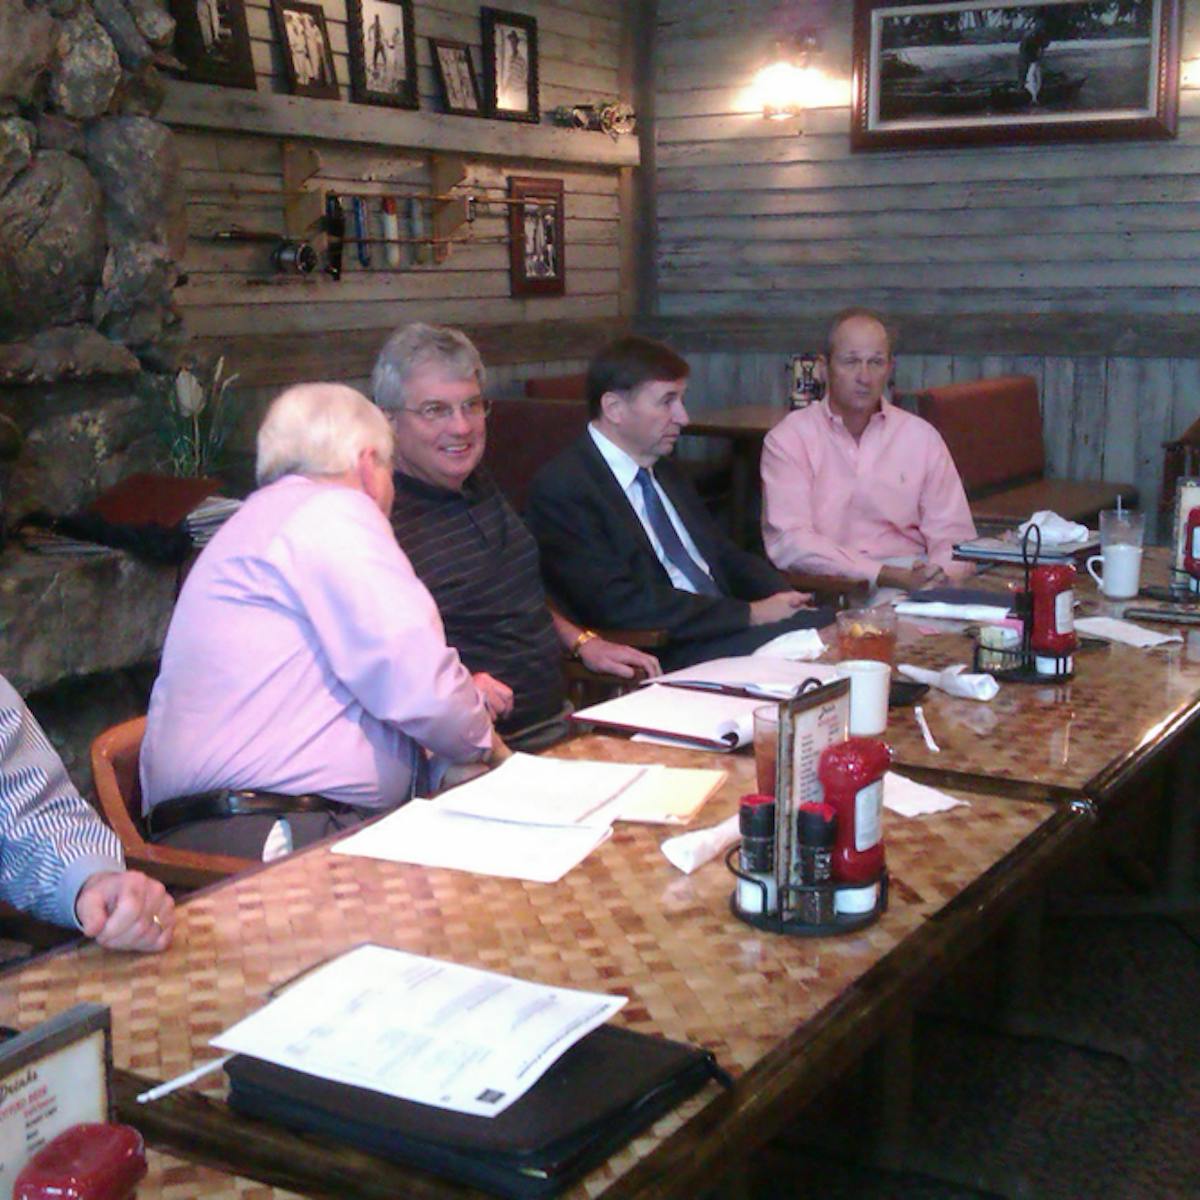 Mississippi state vending association members discuss legislative issues. For photo IDs, see accompanying story.